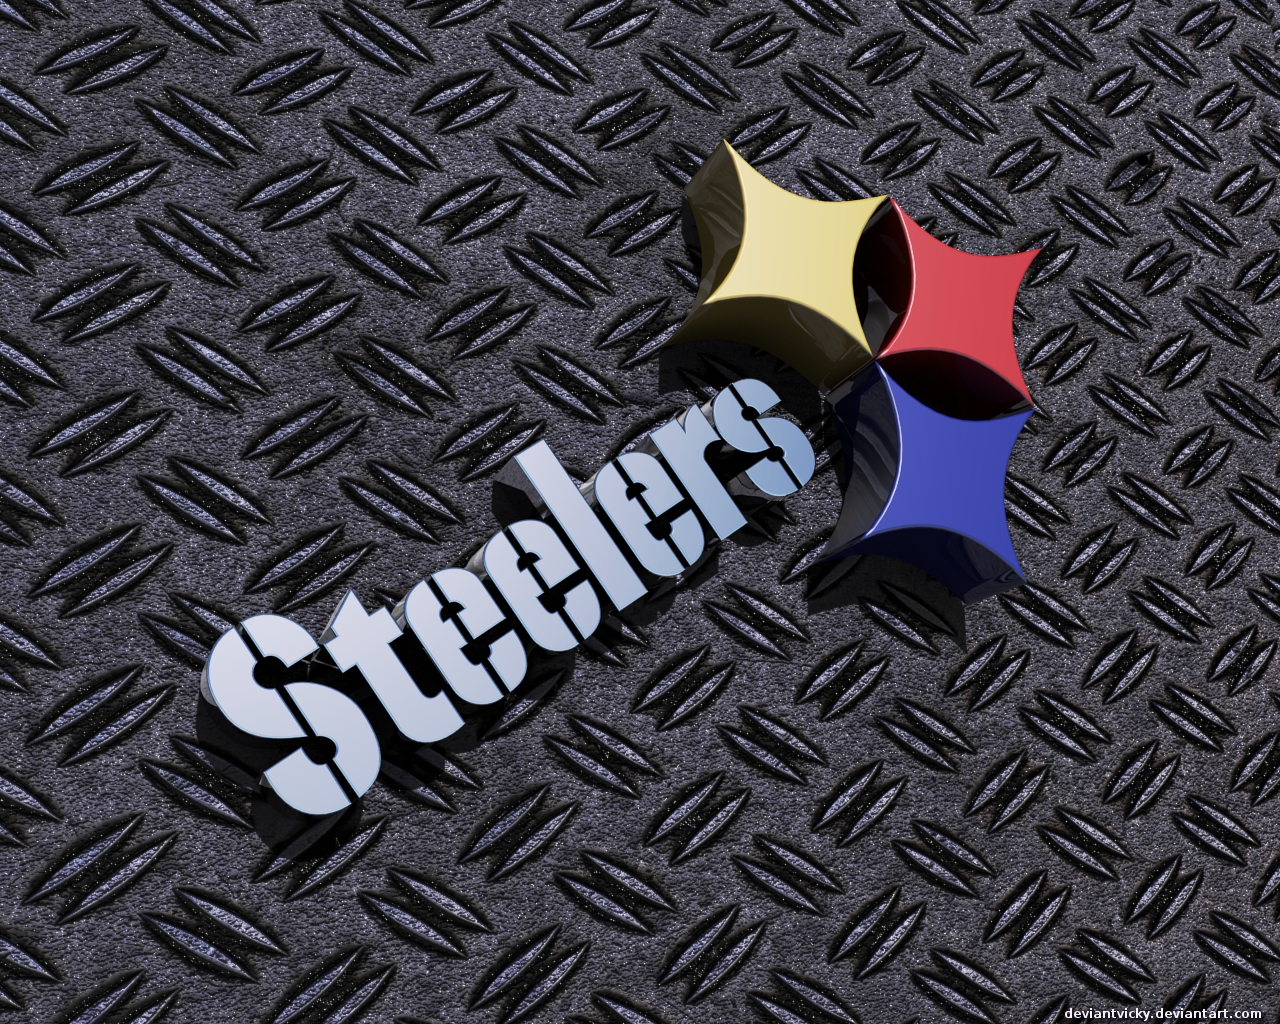 Steelers 3D by DeviantVicky 1280 x 1024